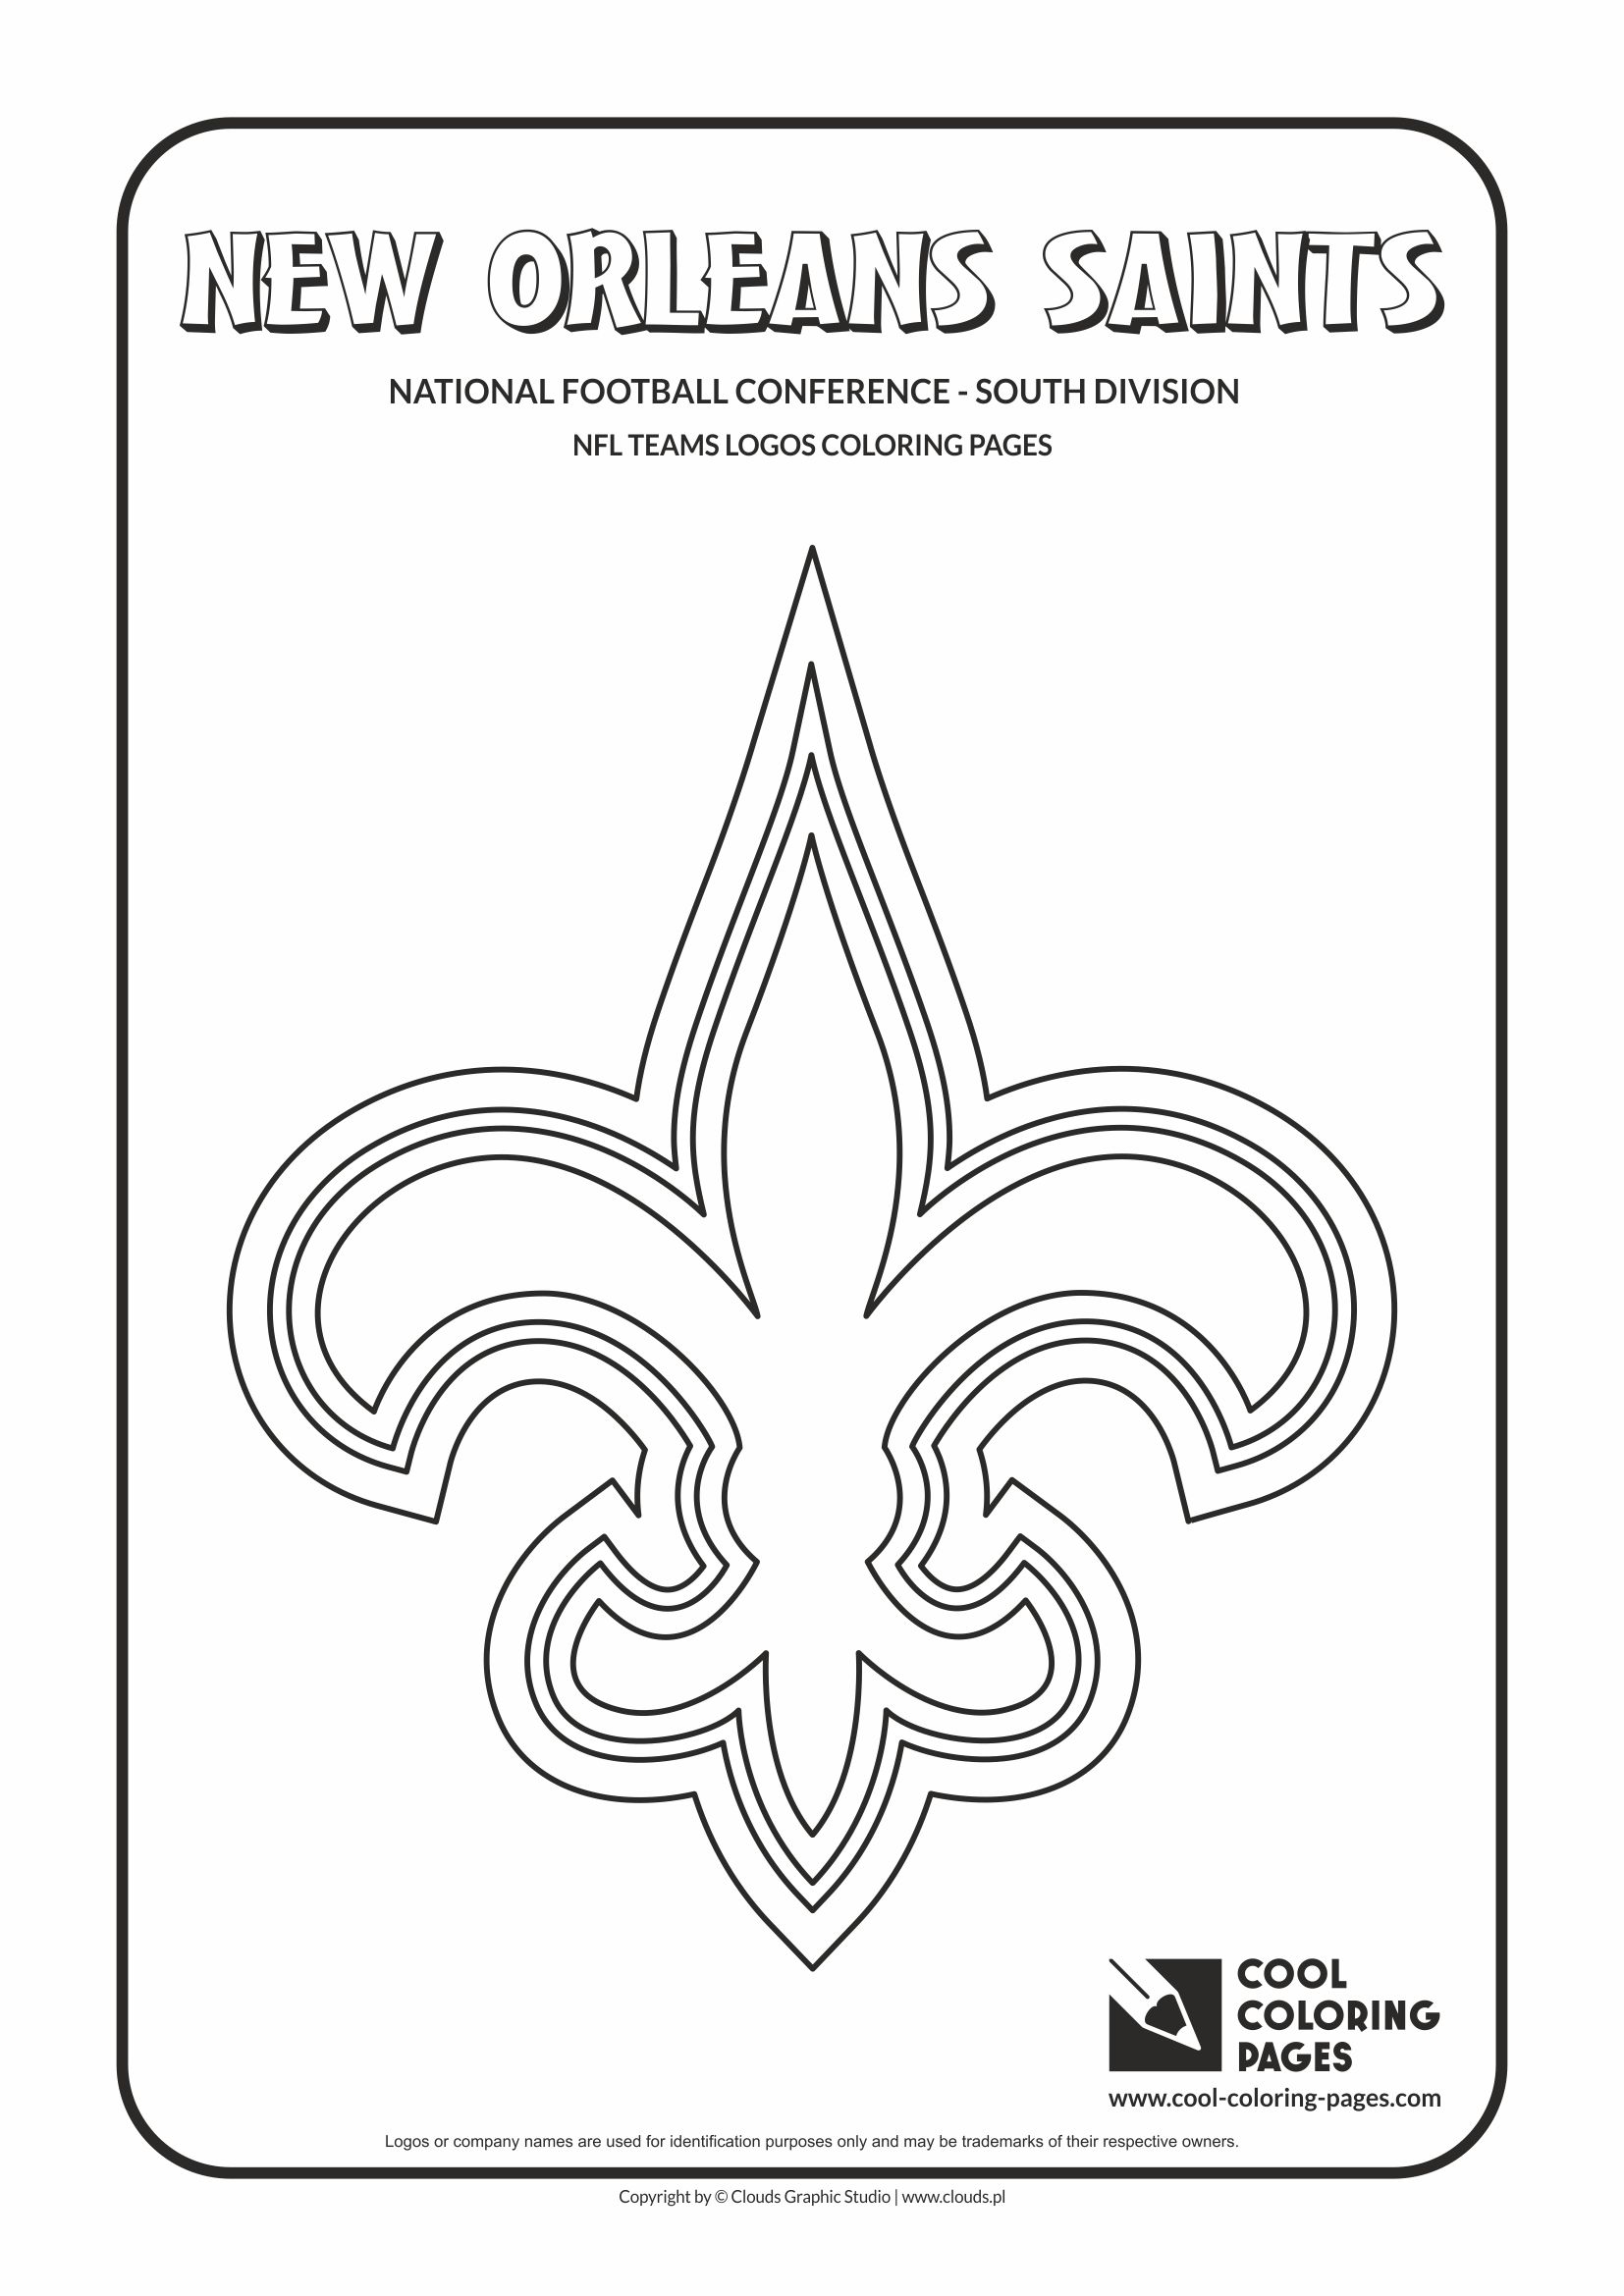 Cool Coloring Pages New Orleans Saints NFL American football teams